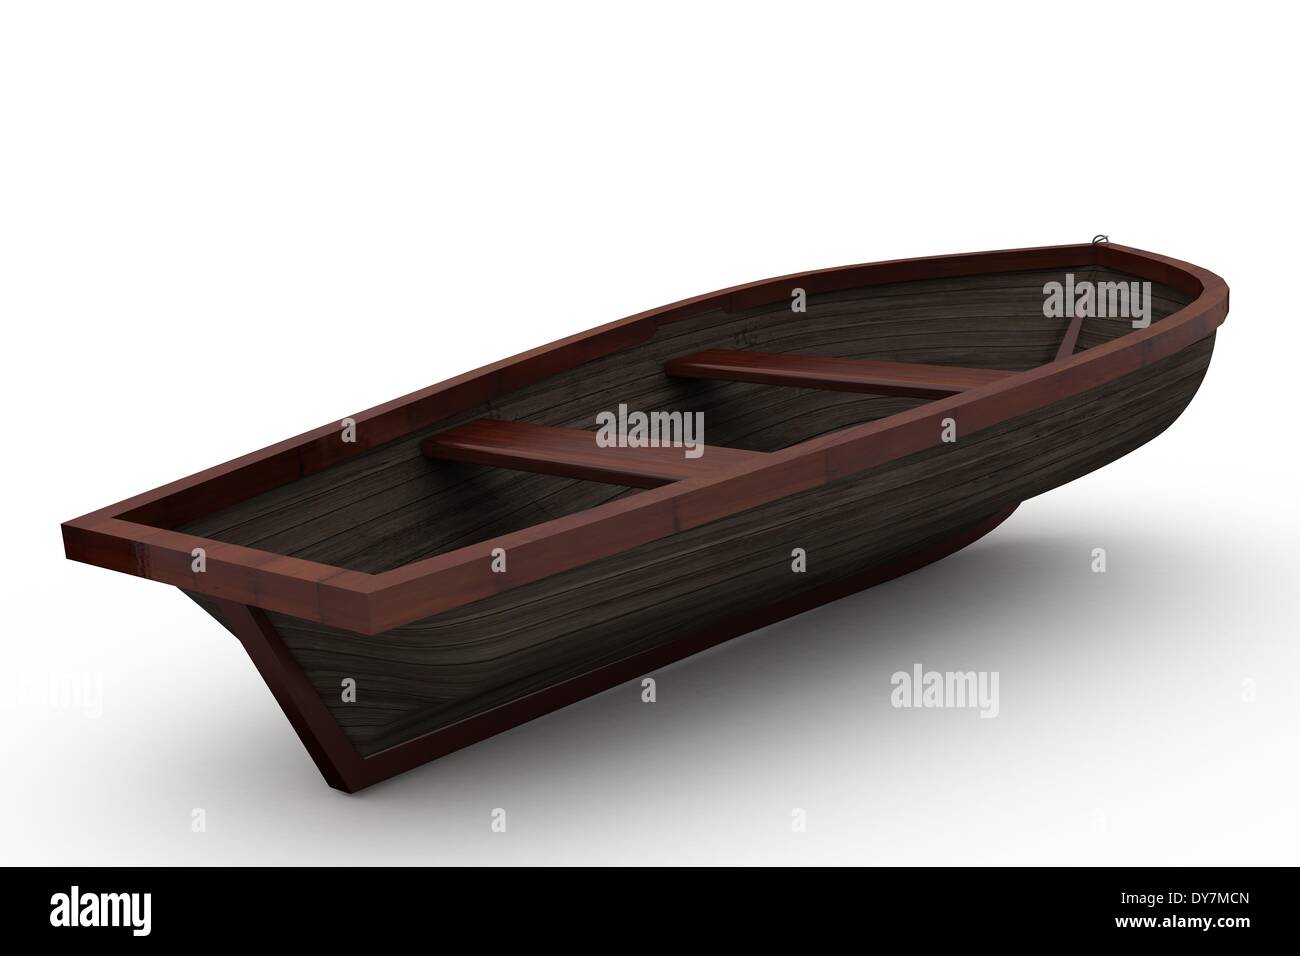 Brown wooden boat with shadow Stock Photo